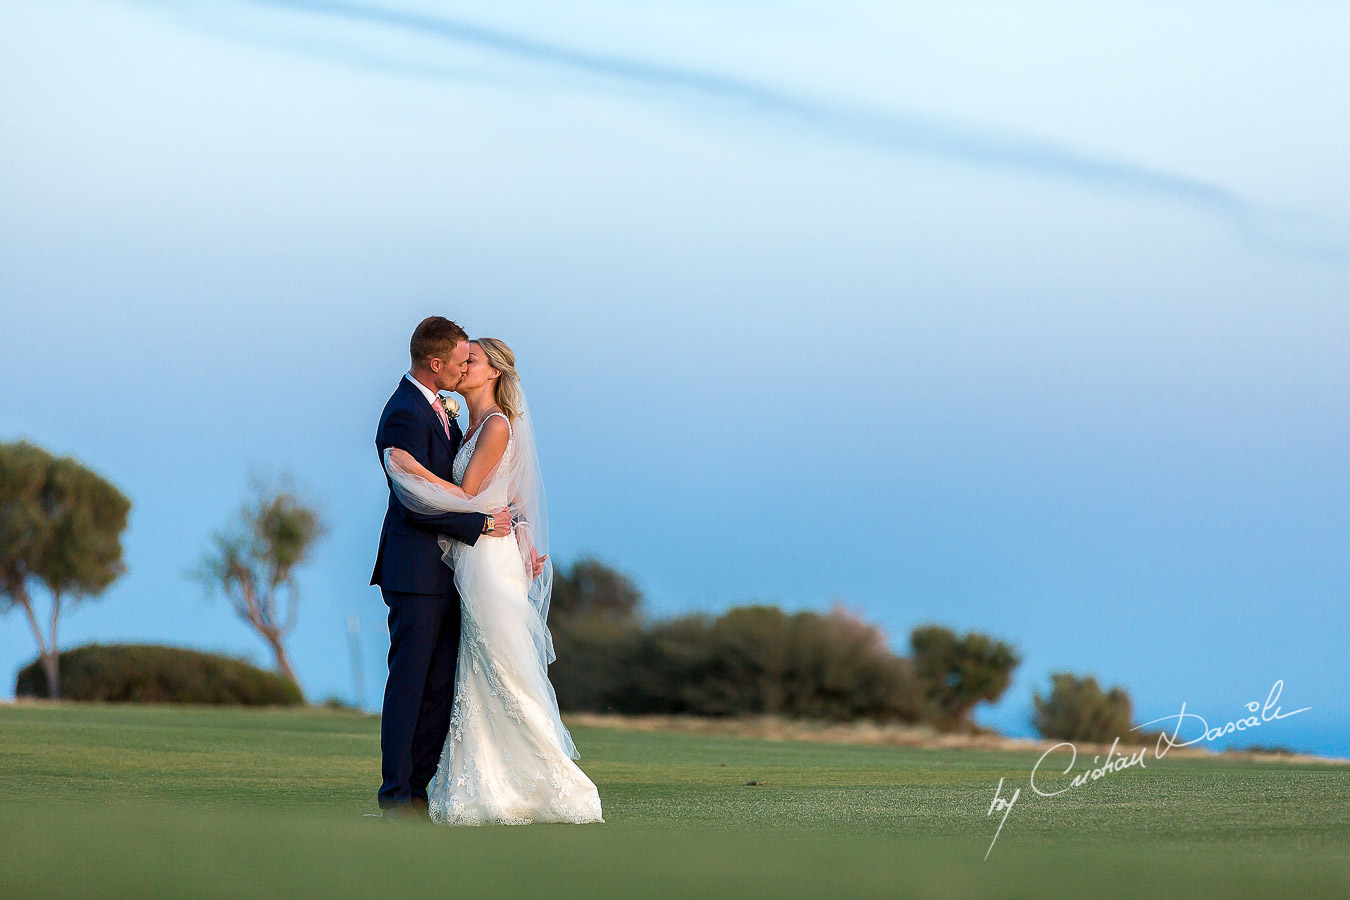 Sunset photoshoot moments captured by Cristian Dascalu at a wedding at The Aphrodite Hills Resort in Paphos, Cyprus.